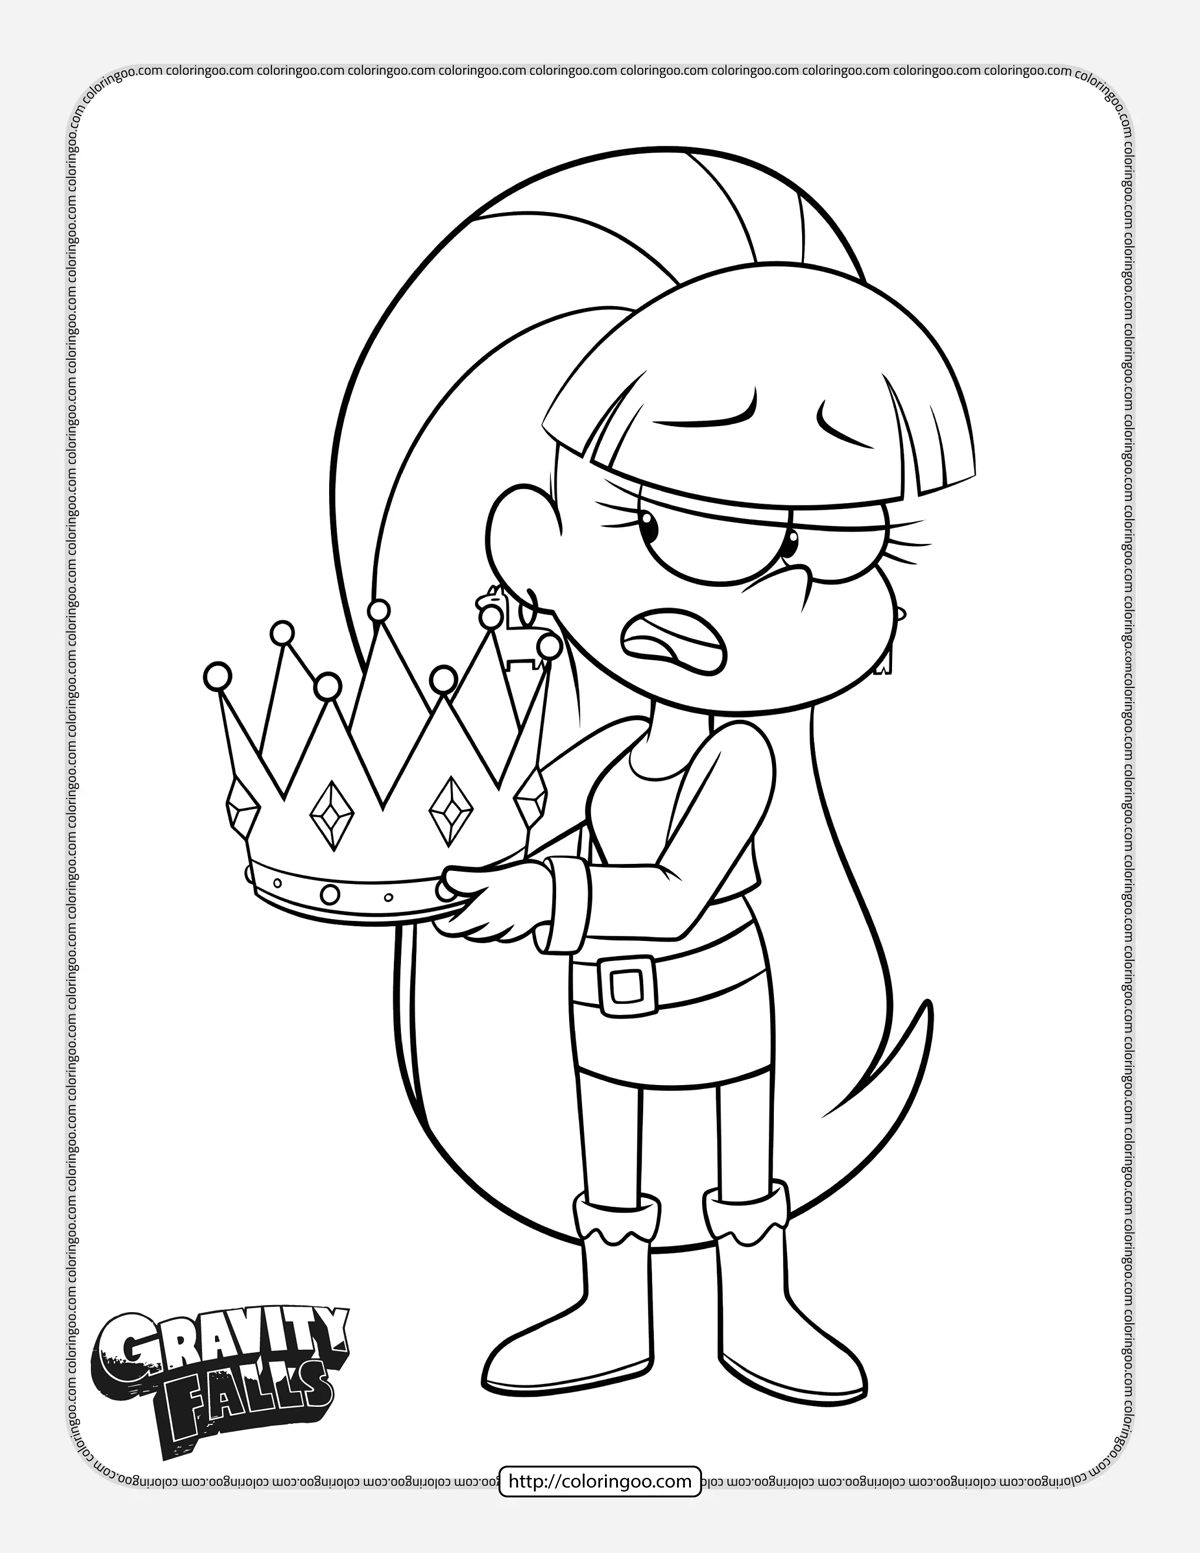 gravity falls pacifica northwest coloring page